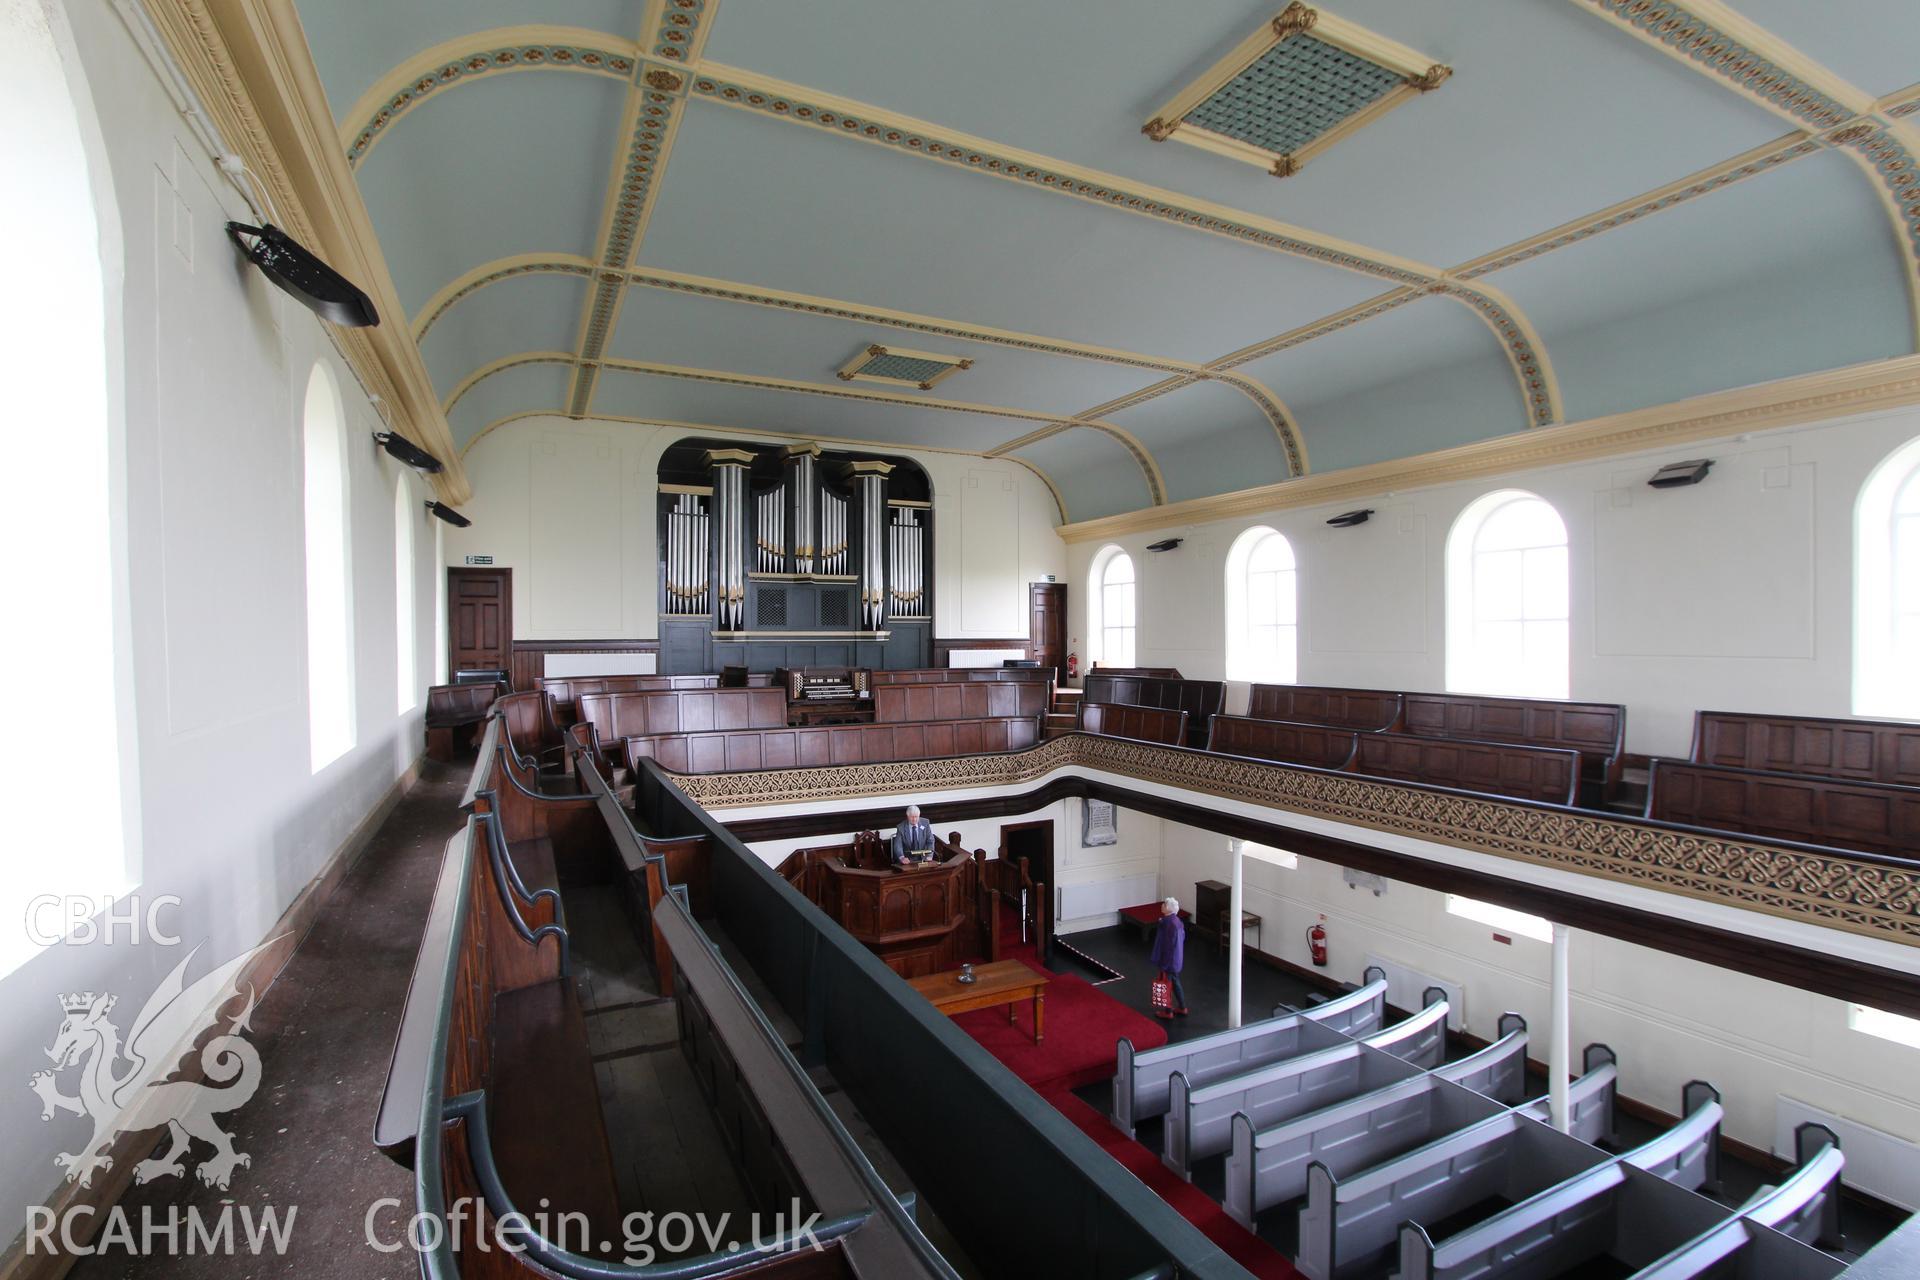 Colour photograph showing interior view looking from first floor balcony towards organ at Mynydd-Bach Independent Chapel, Treboeth, Swansea. Taken during photographic survey conducted by Sue Fielding on 13th May 2017.